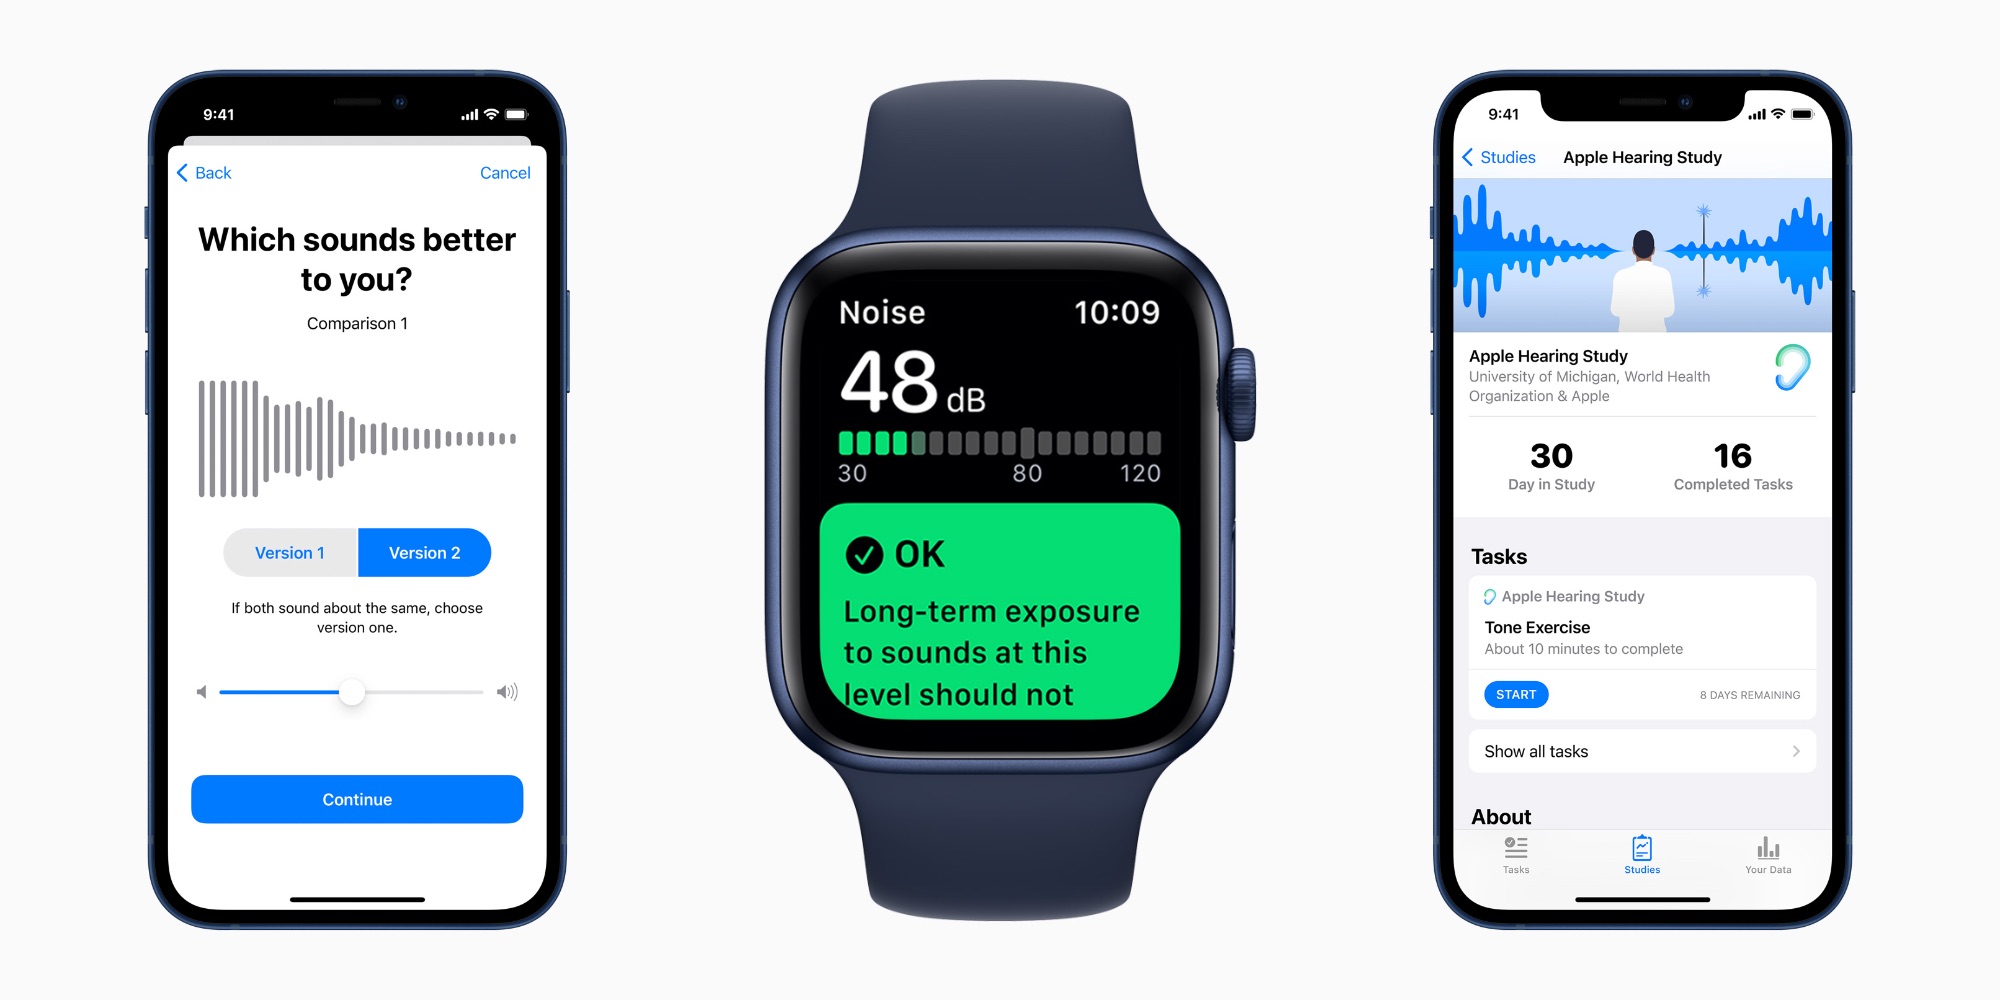 Apple shares updates on its Hearing Study with iPhone and Apple Watch data